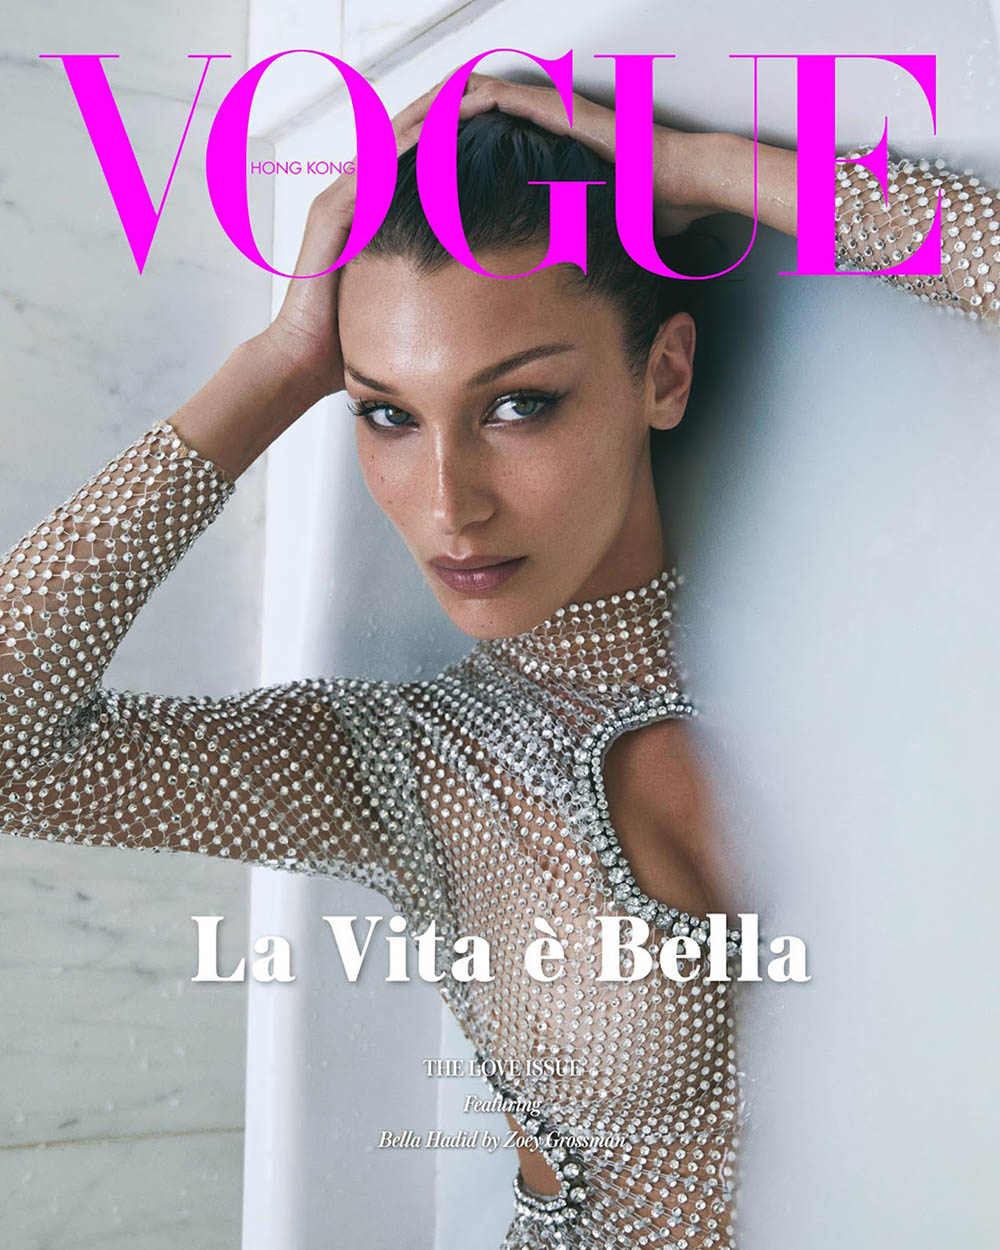 Bella Hadid covers Vogue Hong Kong February 2020 by Zoey Grossman